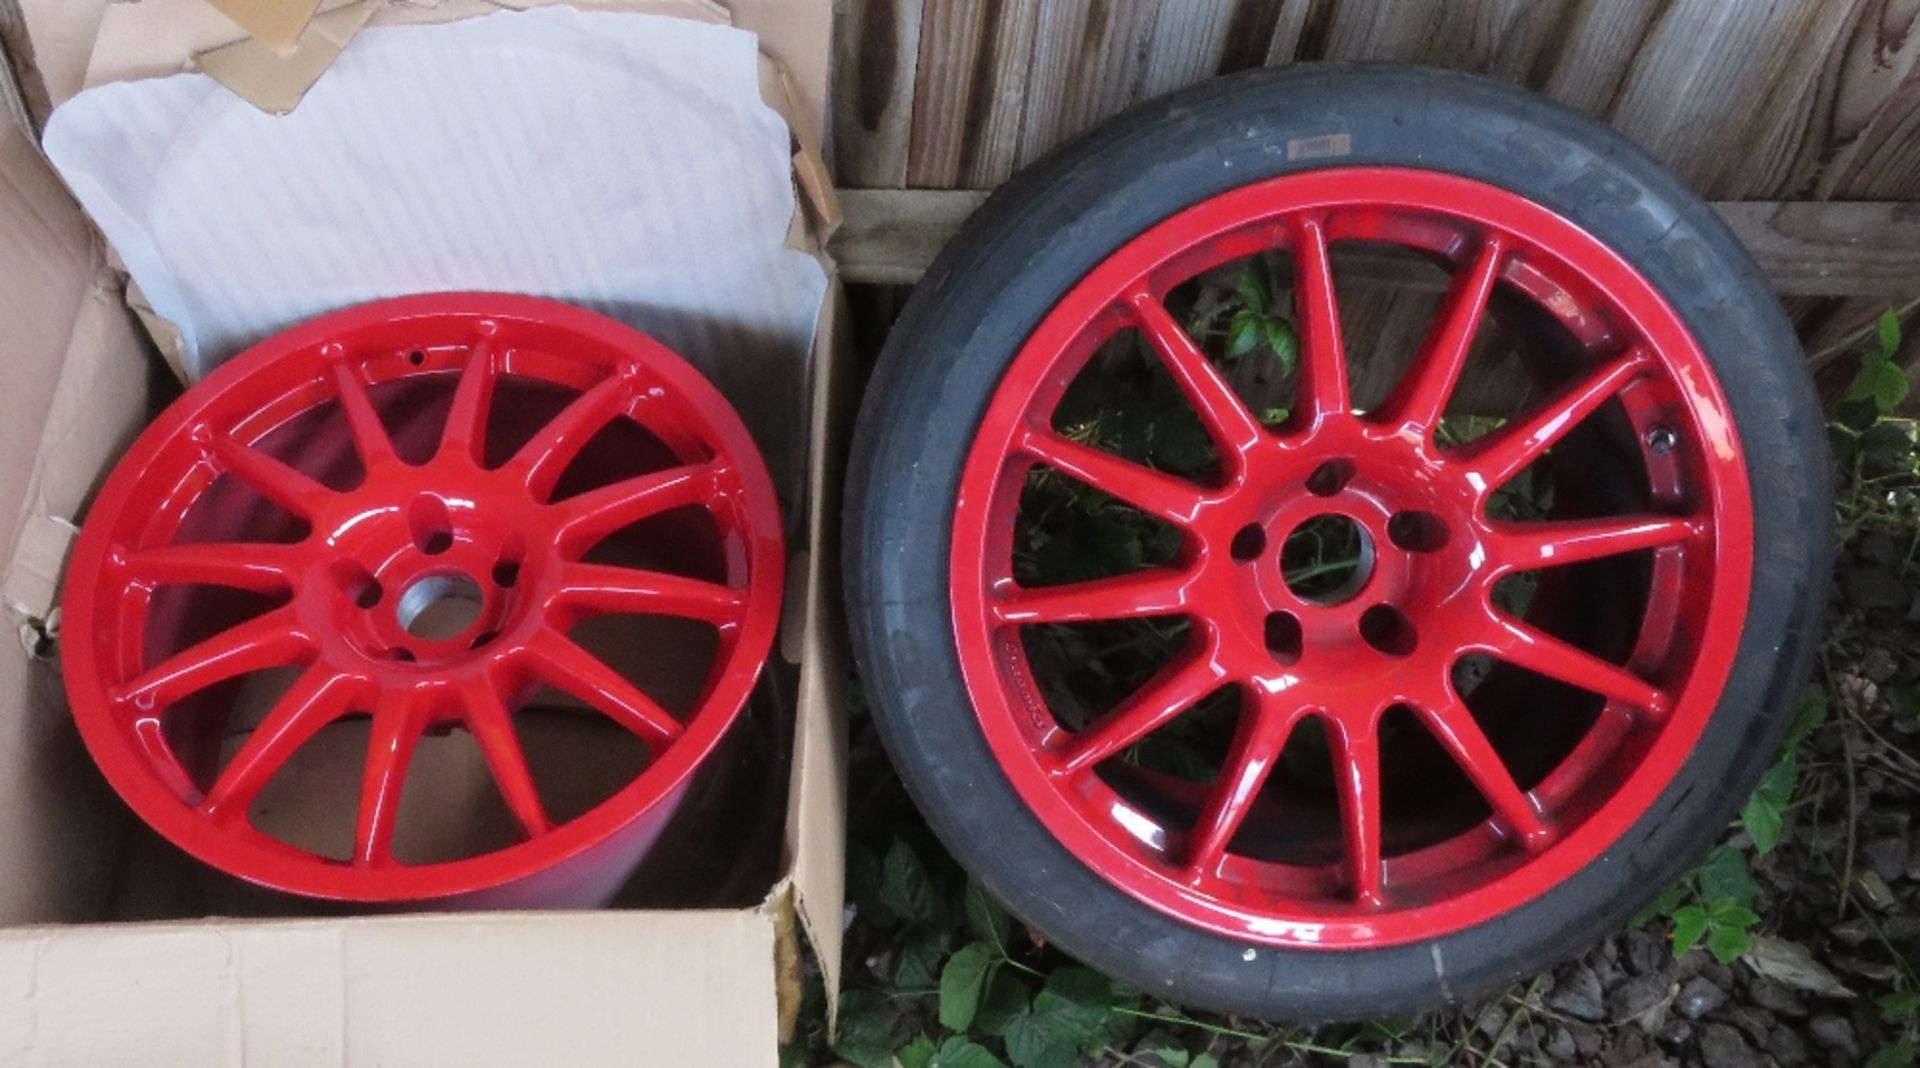 Set of 4 red alloy racing wheels labelled Team Dynamics Pro Race 1.3, 2 with worn tyres in place - Image 2 of 2